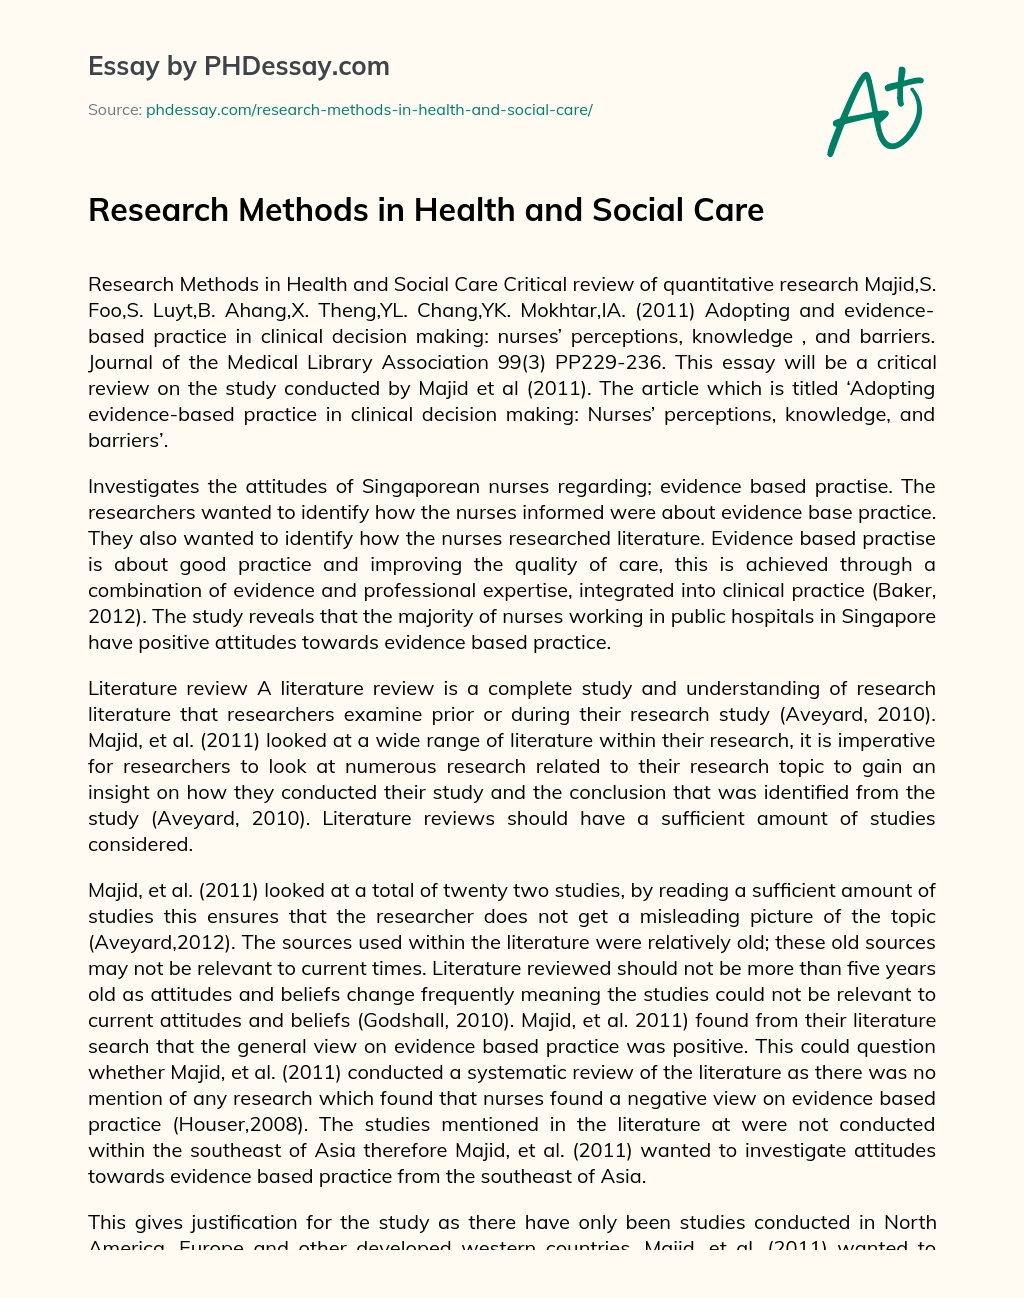 importance of research in health and social care